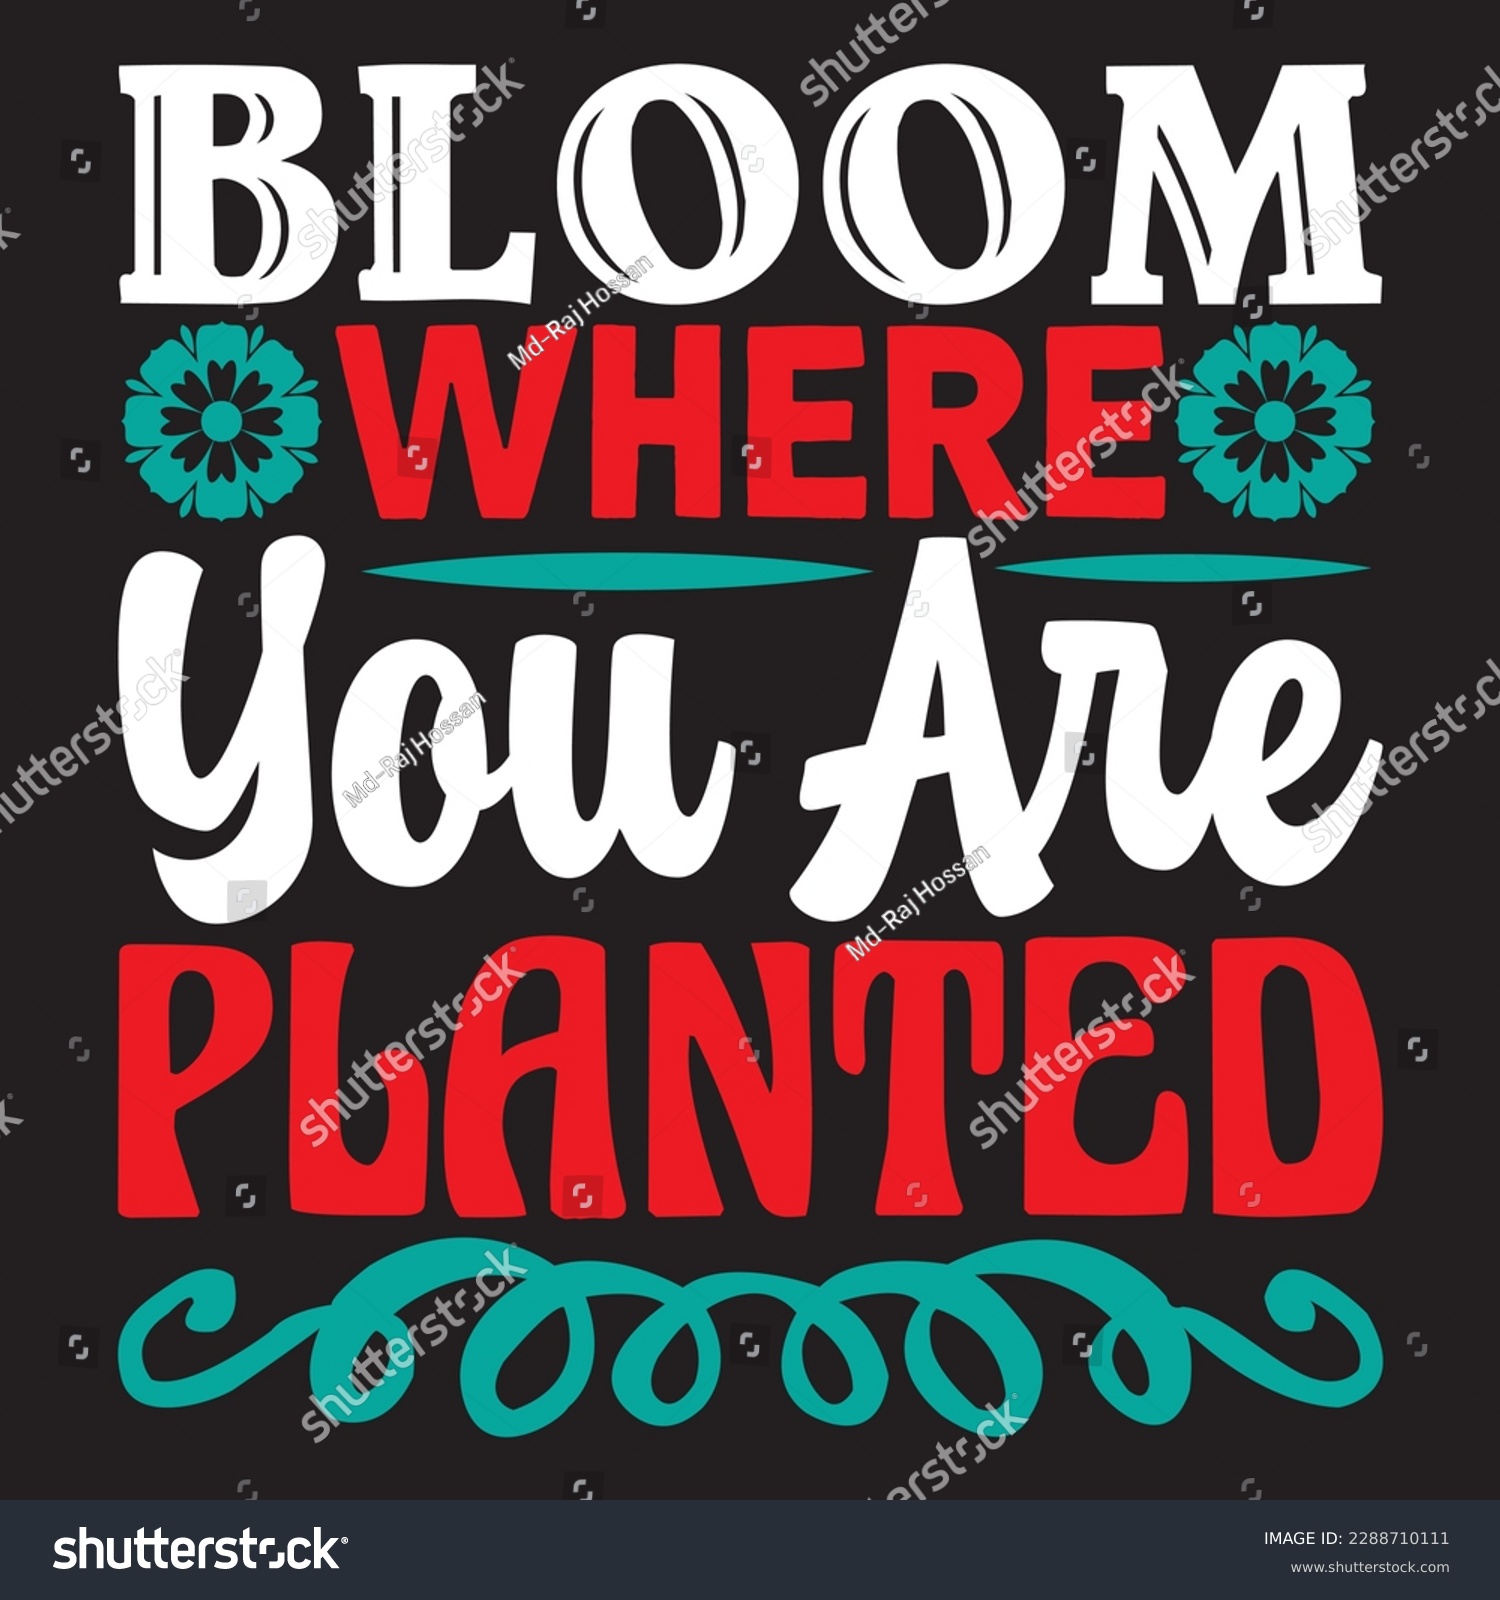 SVG of Bloom Where You Are Planted T-shirt Design Vector File svg